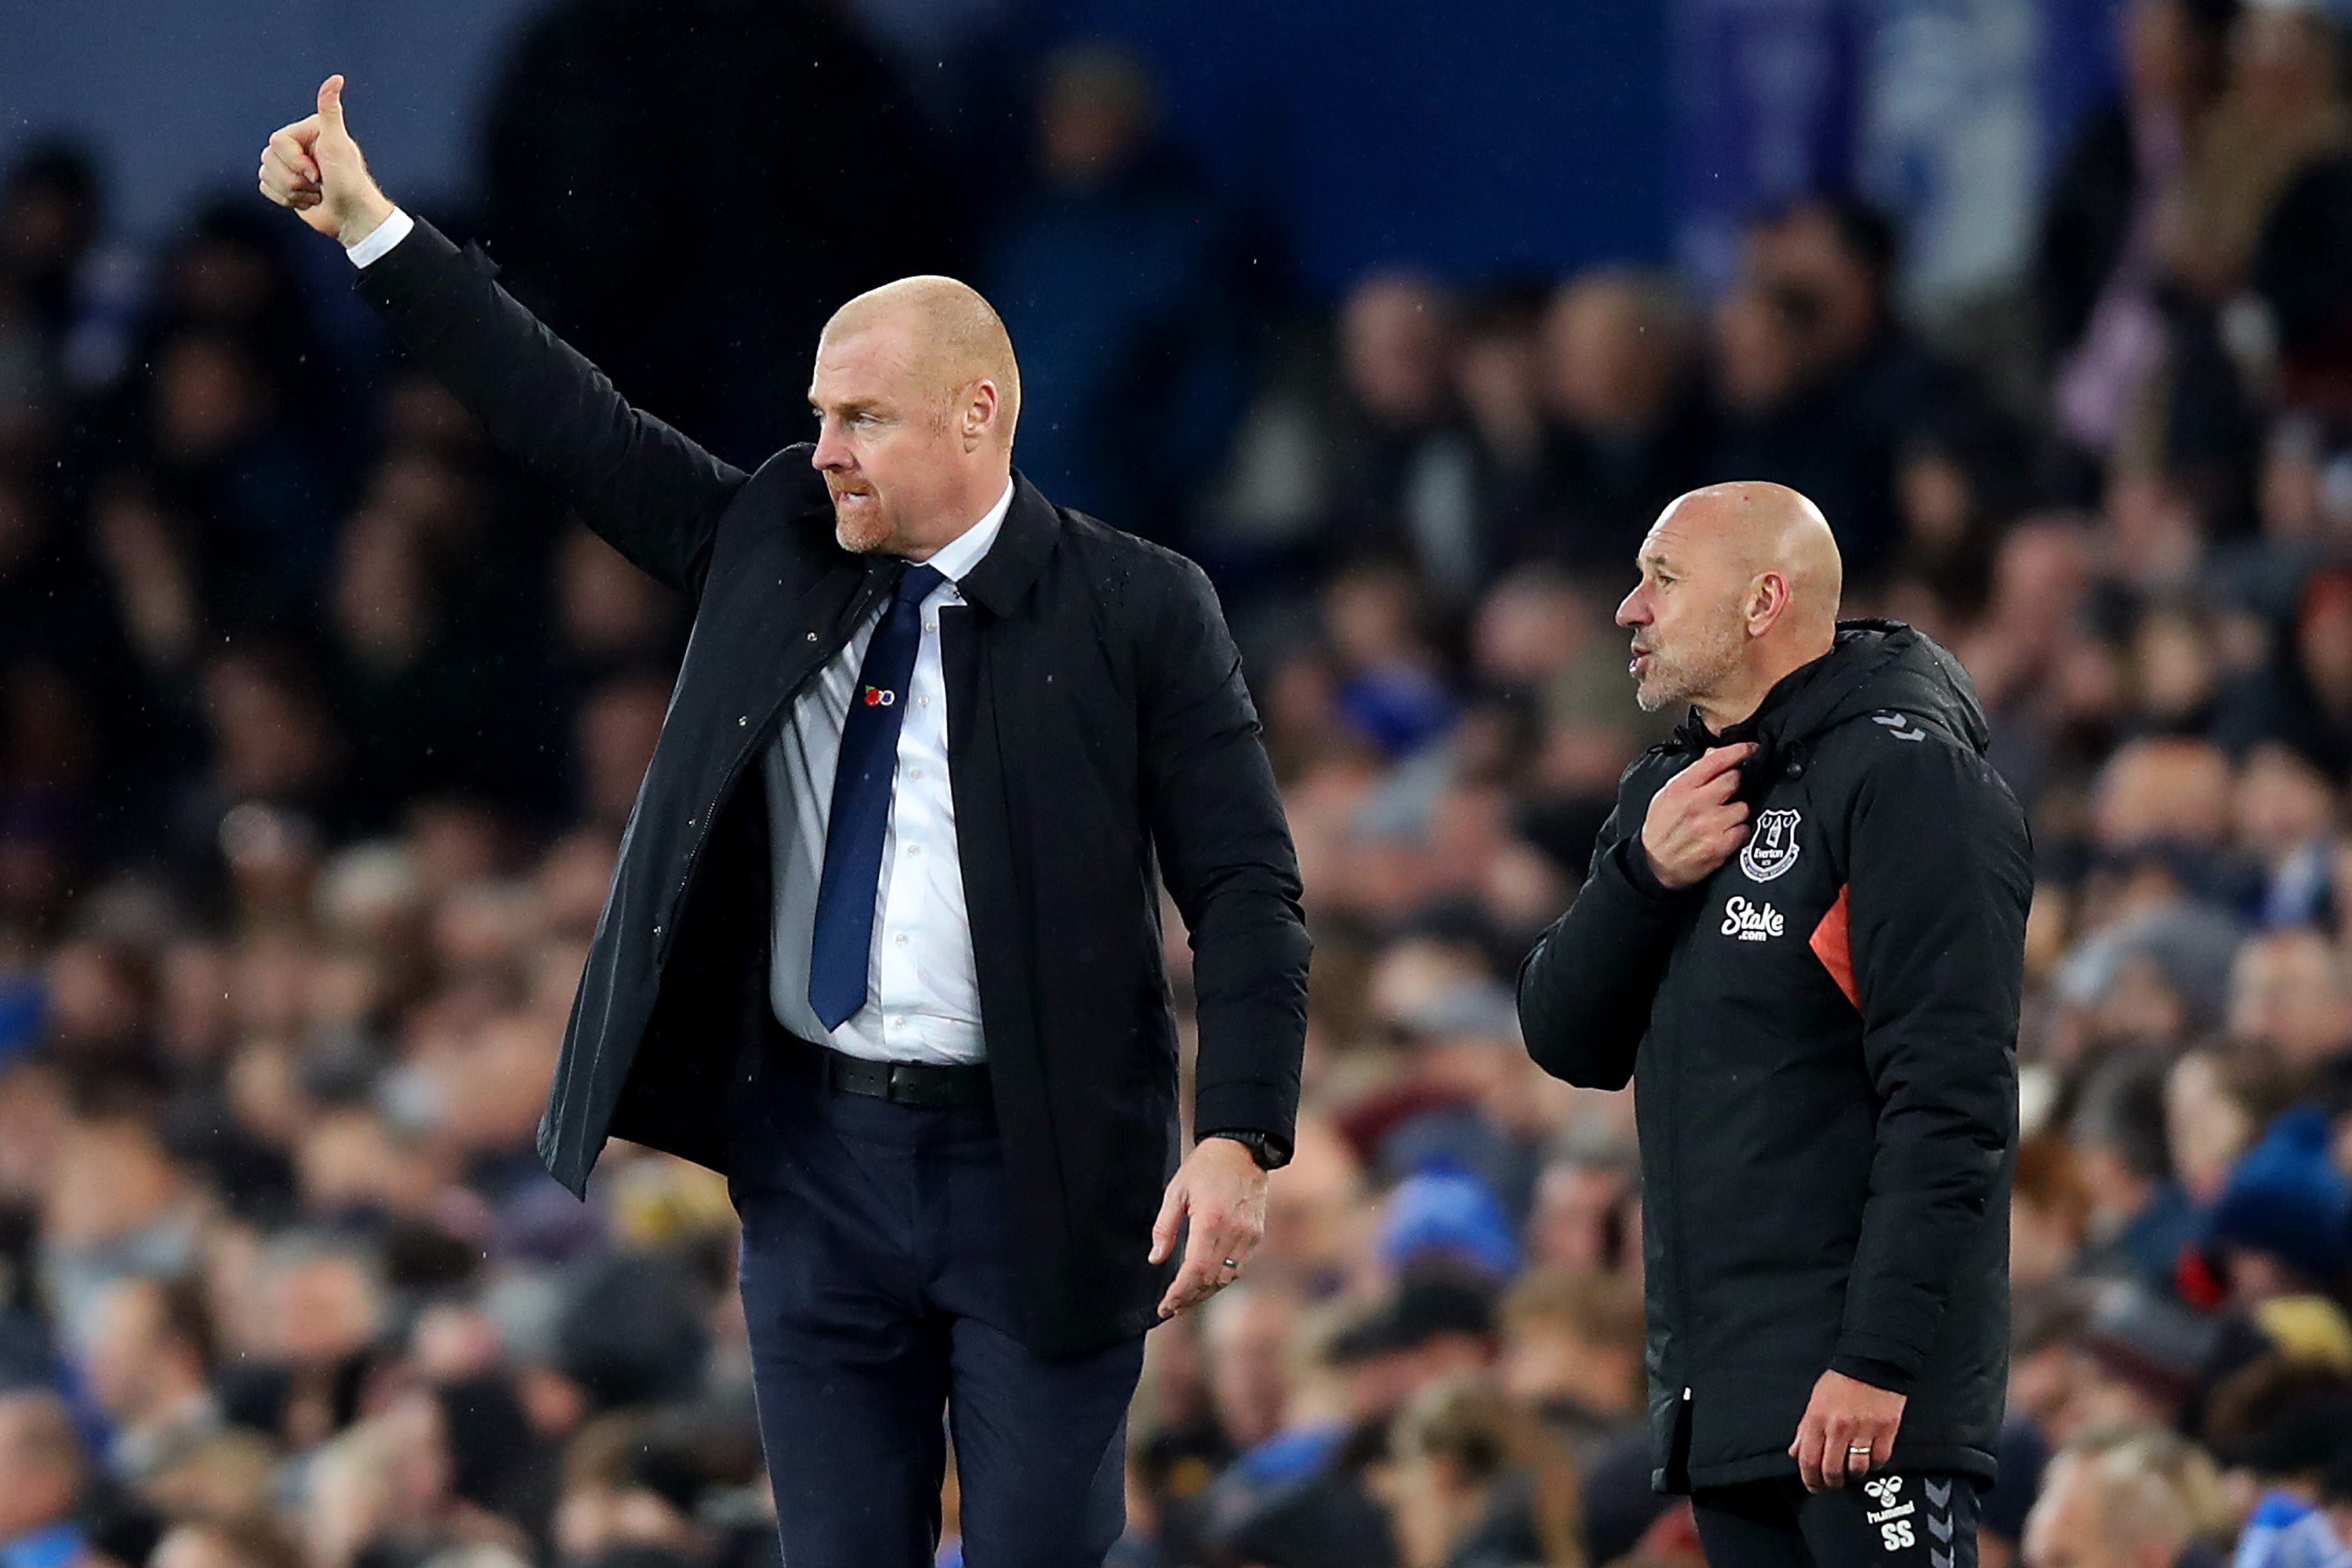 Sean Dyche has a task on his hands to keep Everton in the Premier League following their 10-point deduction for breaching financial rules